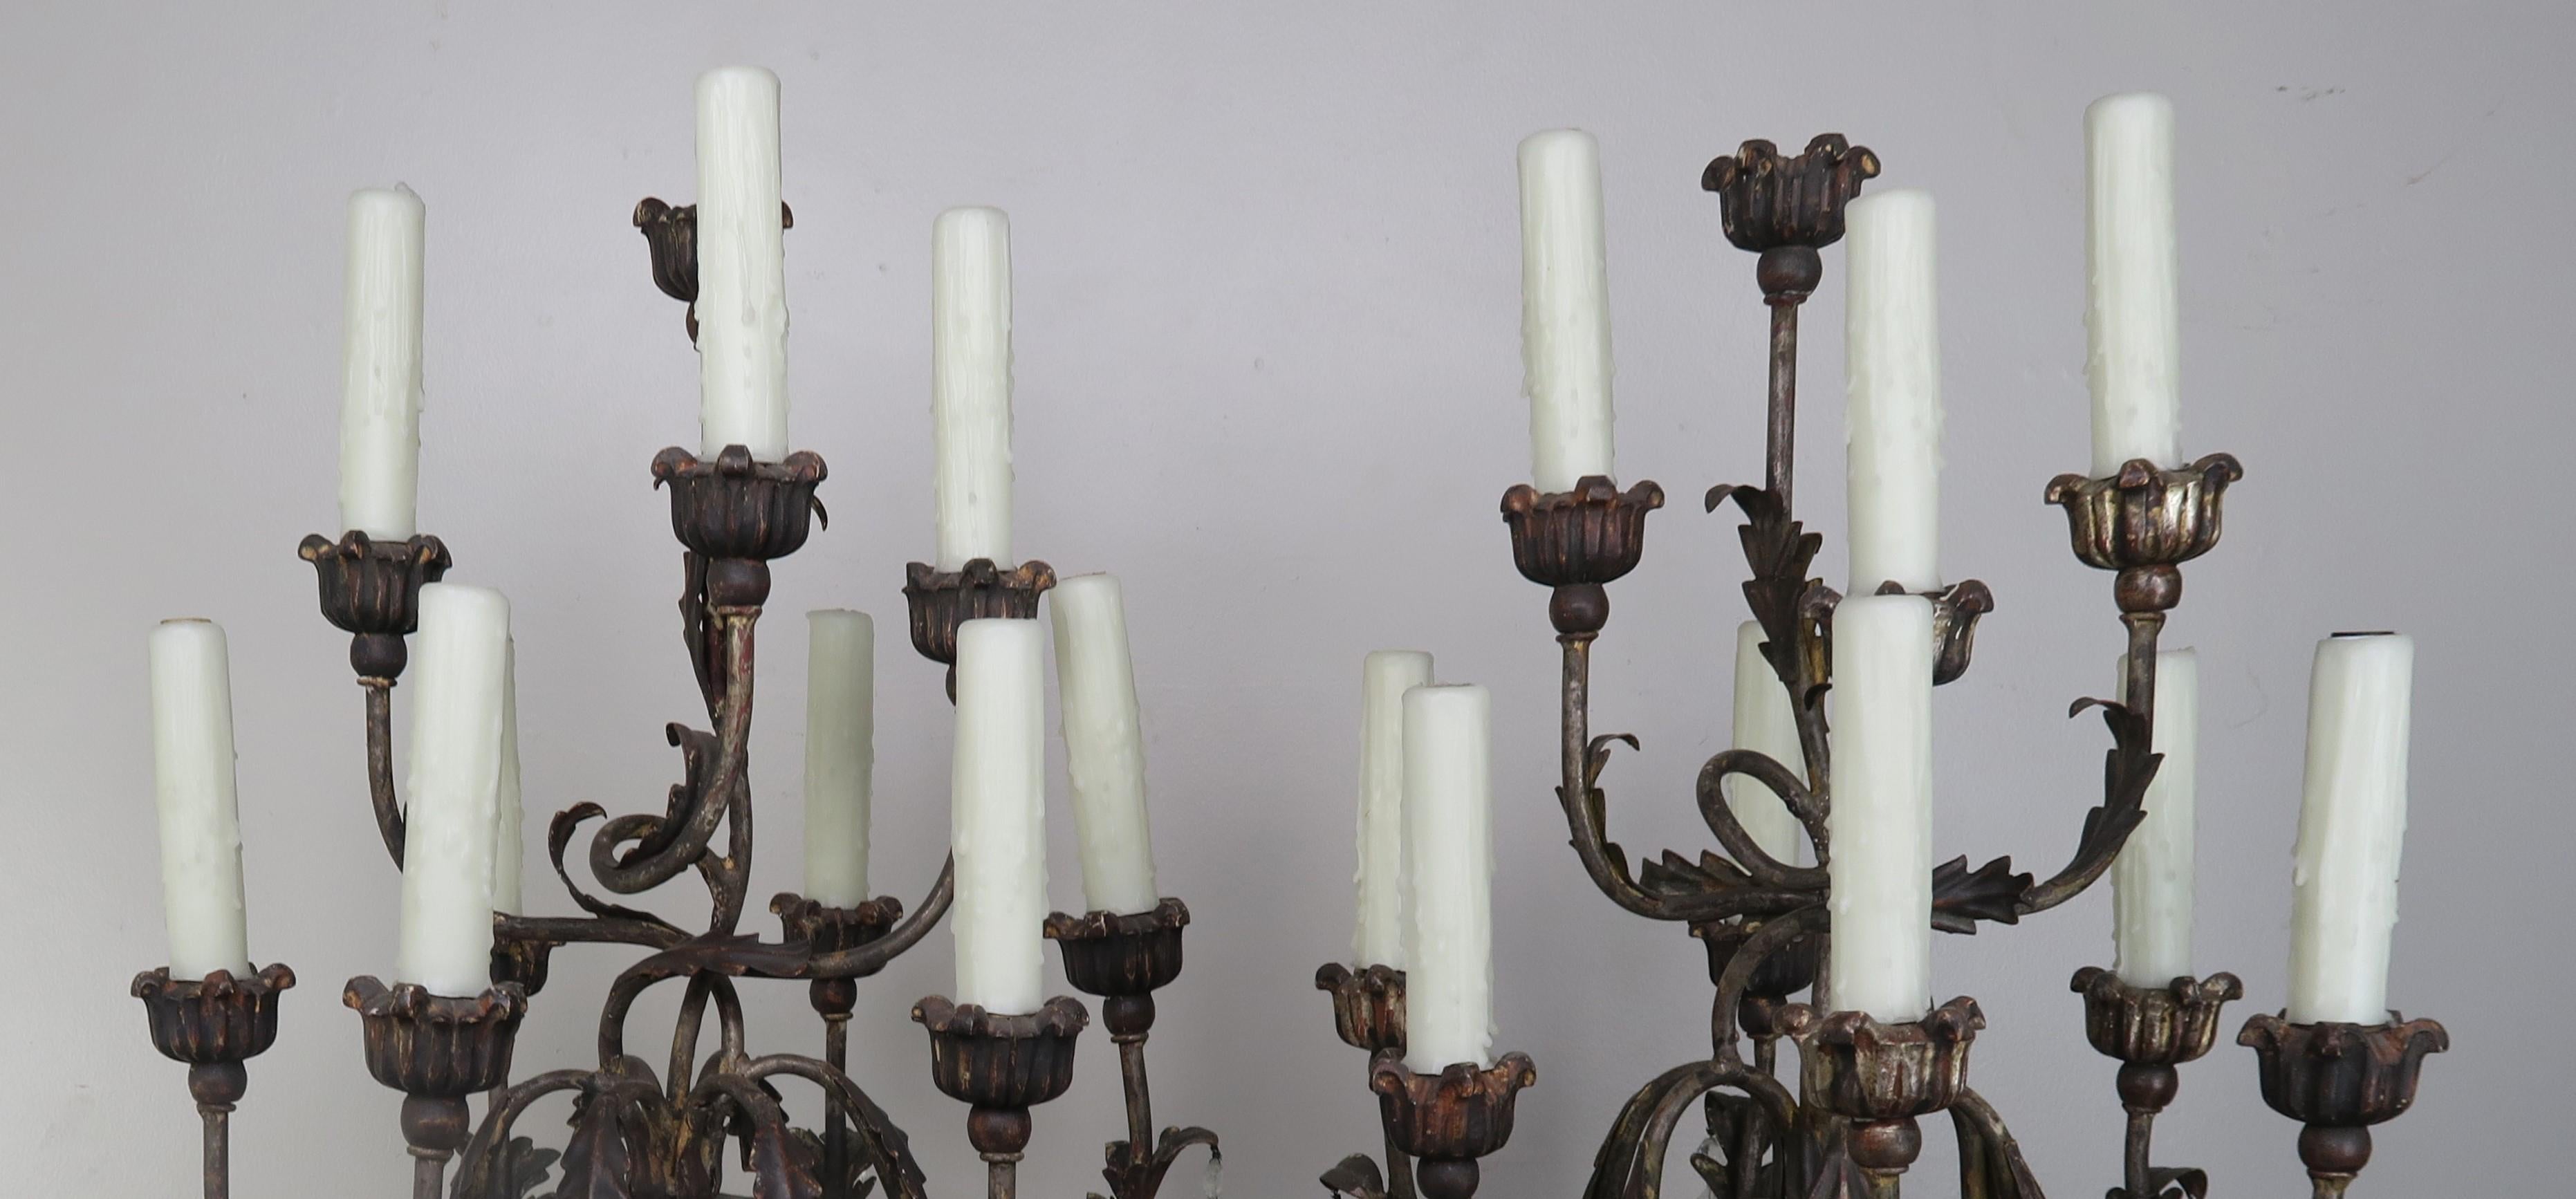 Pair of Italian Rococo style carved wood painted and parcel-gilt nine-light candelabra adorned with almond shaped rock crystals. Newly wired with drip wax candle covers and in working condition.